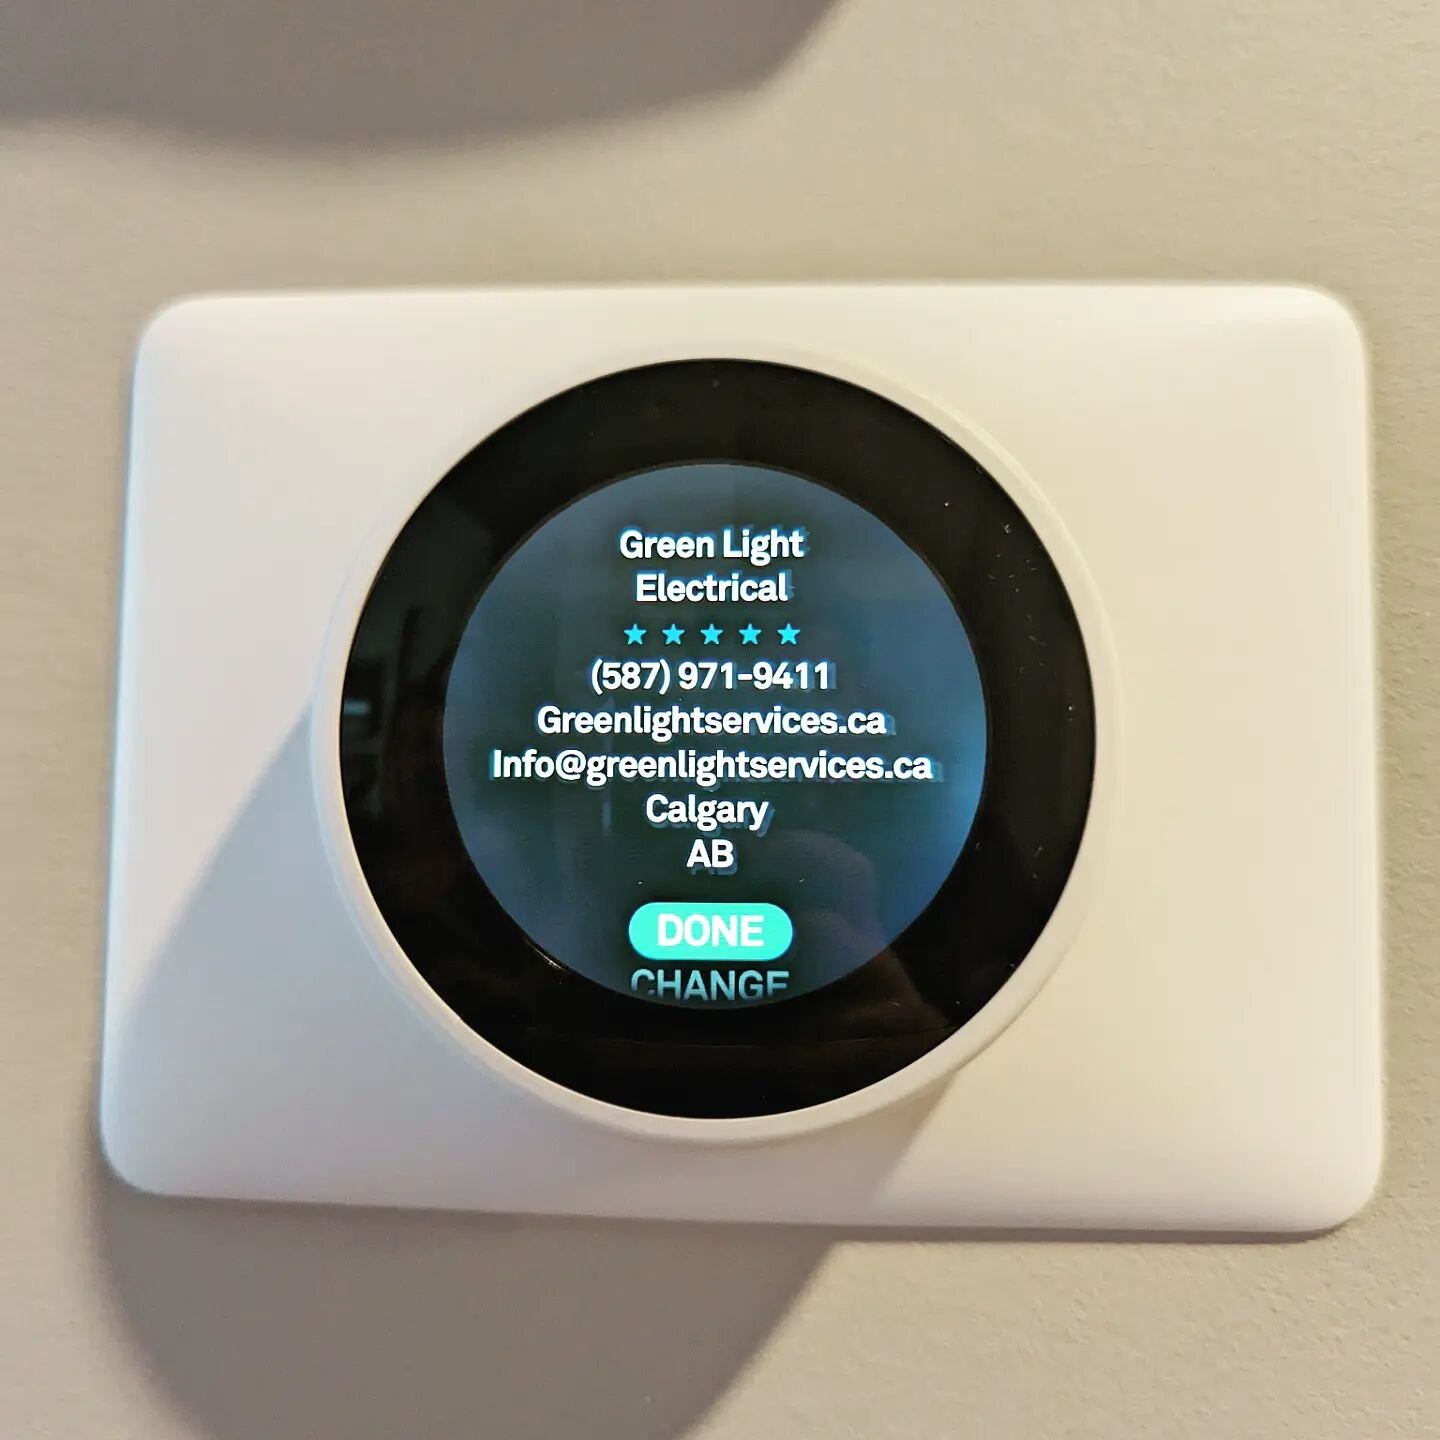 Google Nest Smart Thermostat @greenlight.ca

Can't wait to see what happens Nest! 

* Wired 
* Common wire 
* May the 4th 

Greenlight Electrical Services ltd.
Your local GoogleNest pro if youre having trouble we will put the light on it! 

Video mon